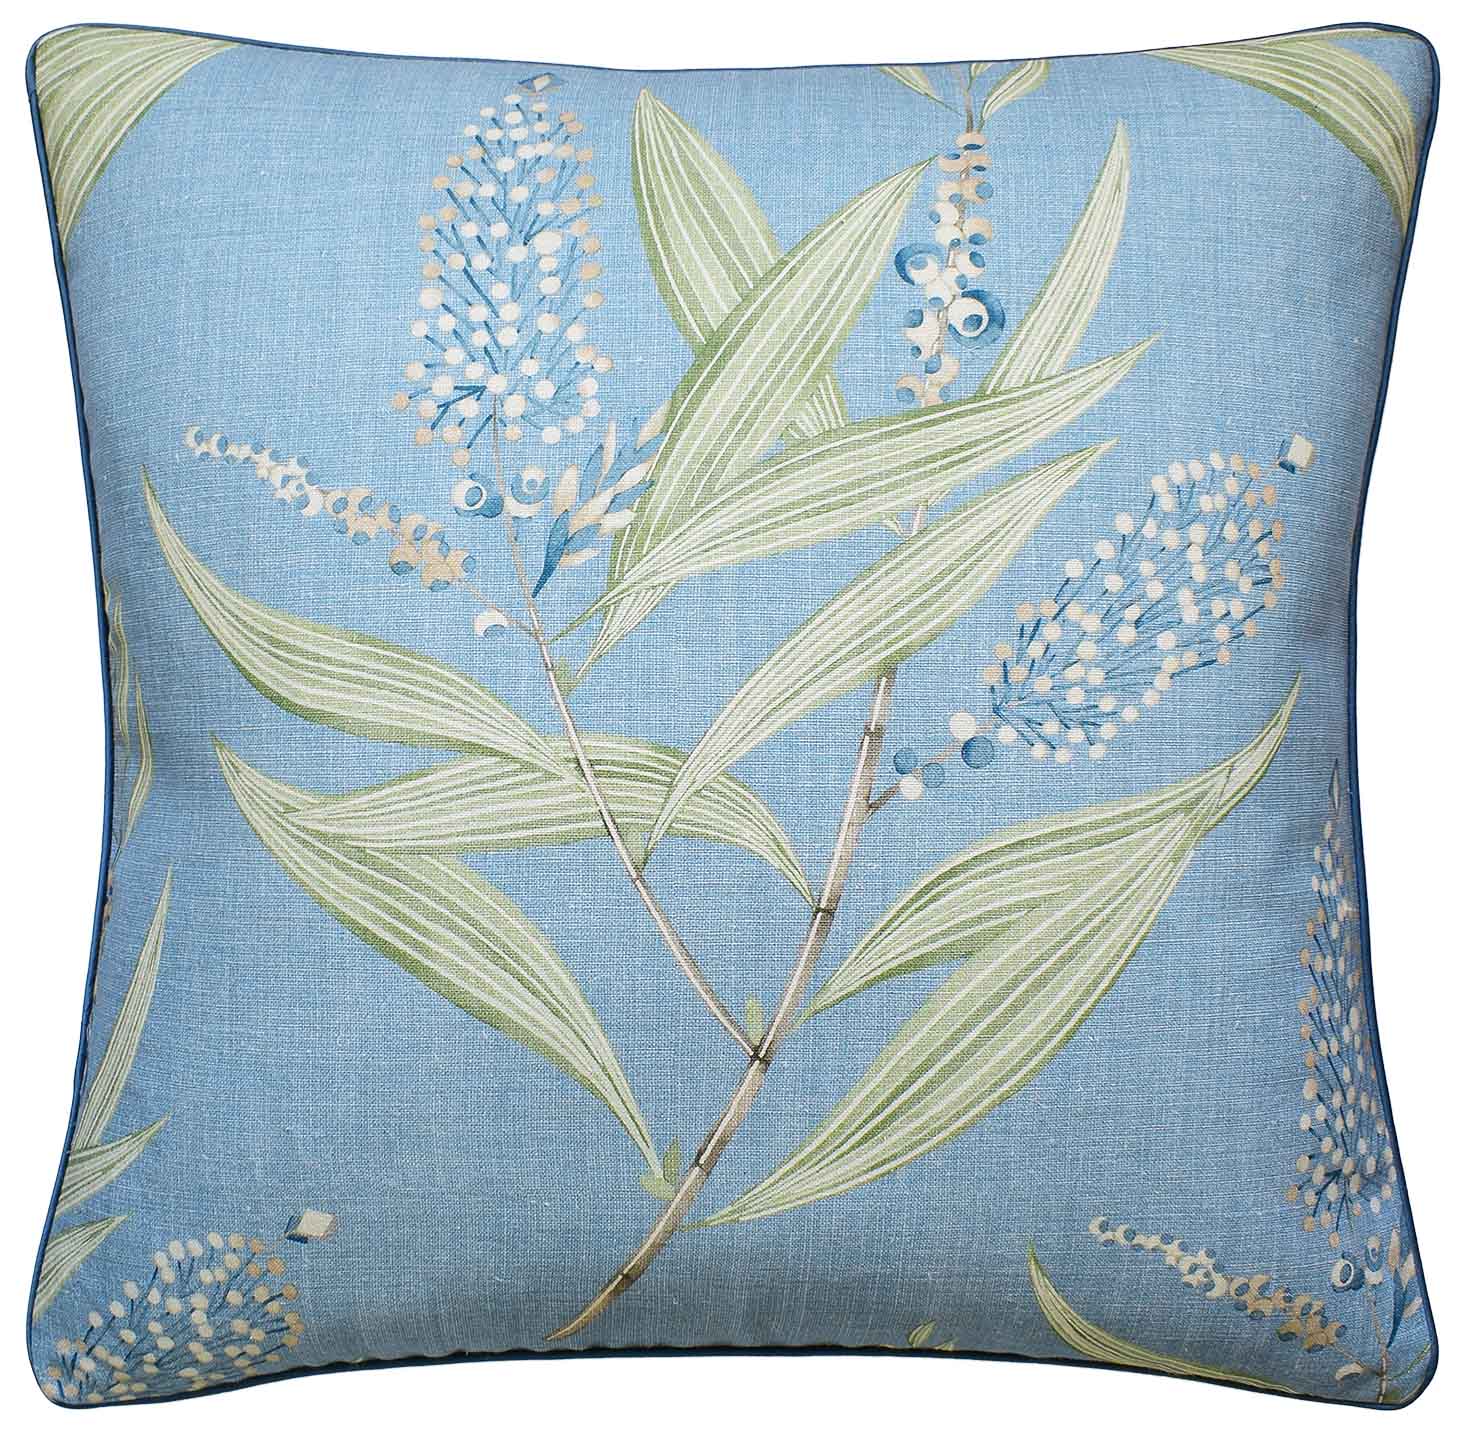 Winter Bud Teal - Throw Pillow by Ryan Studio made from Thibaut Fabric; Anna French Design